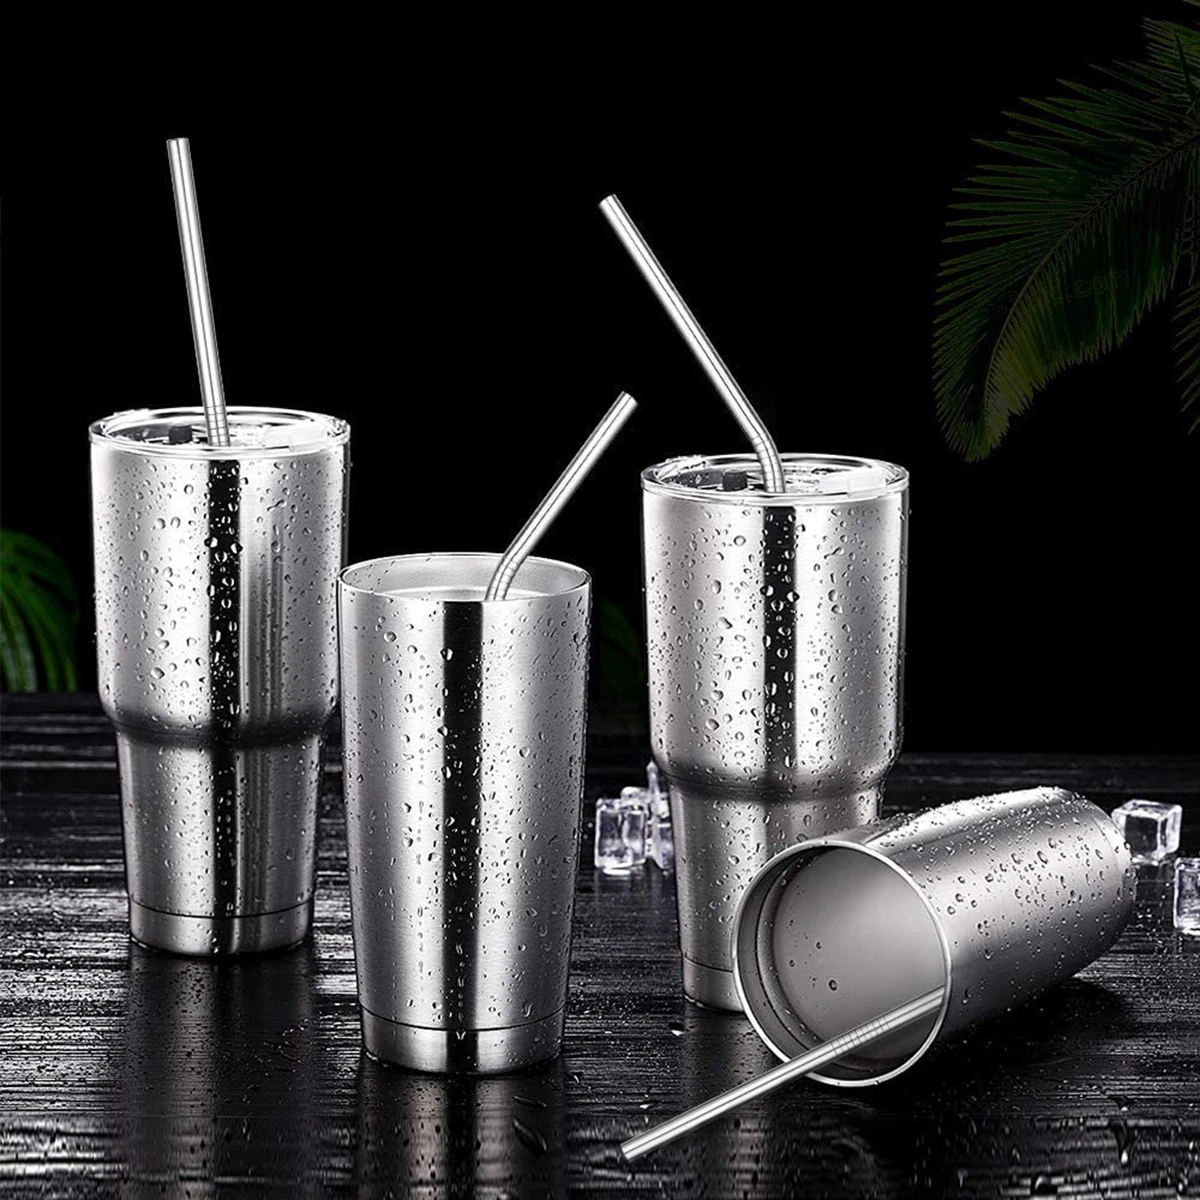 https://ae01.alicdn.com/kf/S261580b8a9c54bef87a647bcc4ff94ddf/12pcs-Long-304-Stainless-Steel-Straws-with-Bag-Reusable-Drinking-Straws-for-Cocktail-Tumblers-Cups-Metal.jpg